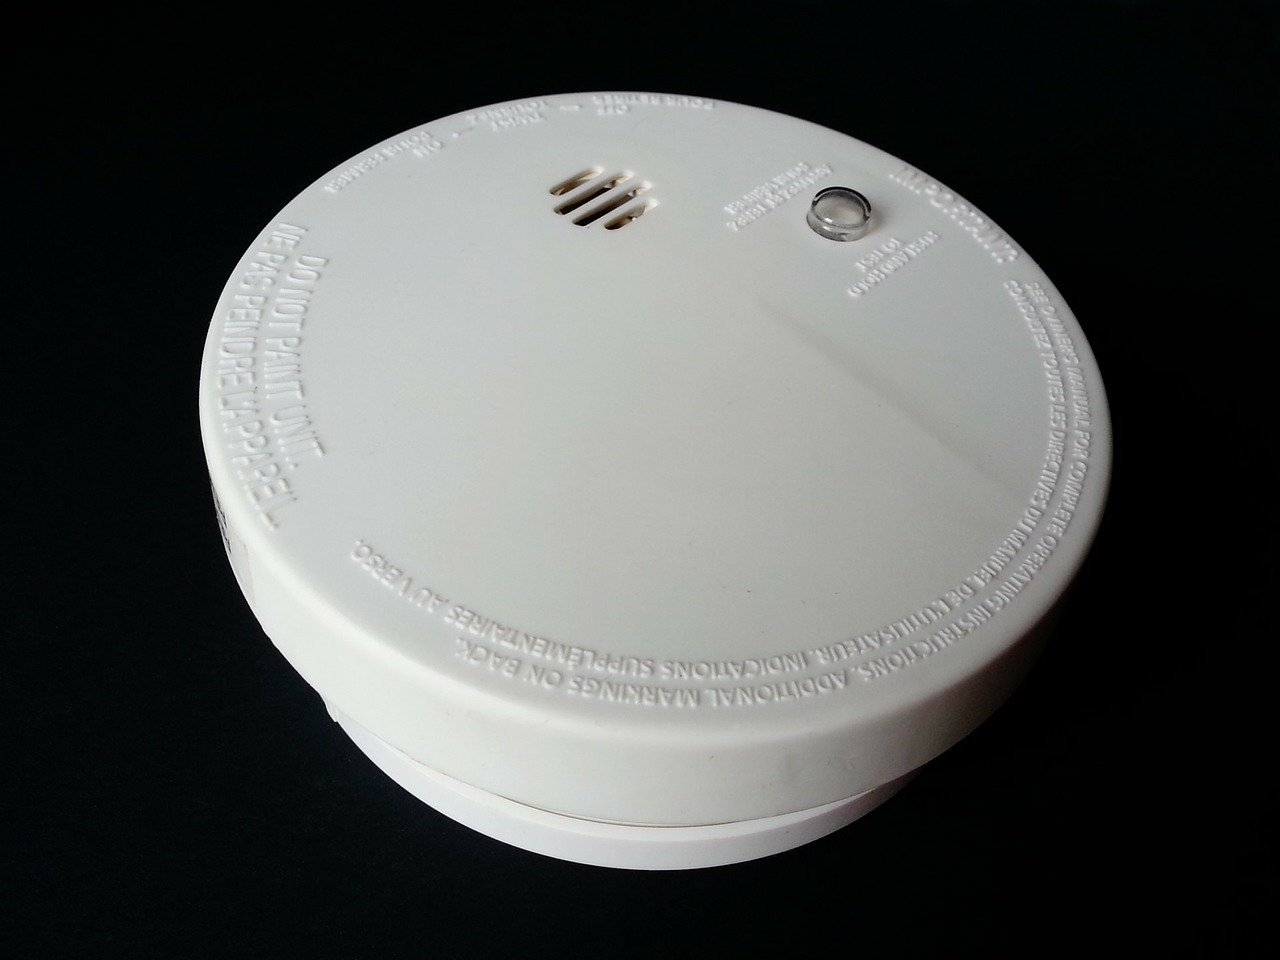 Apartment Not Equipped With Working Smoke Detectors